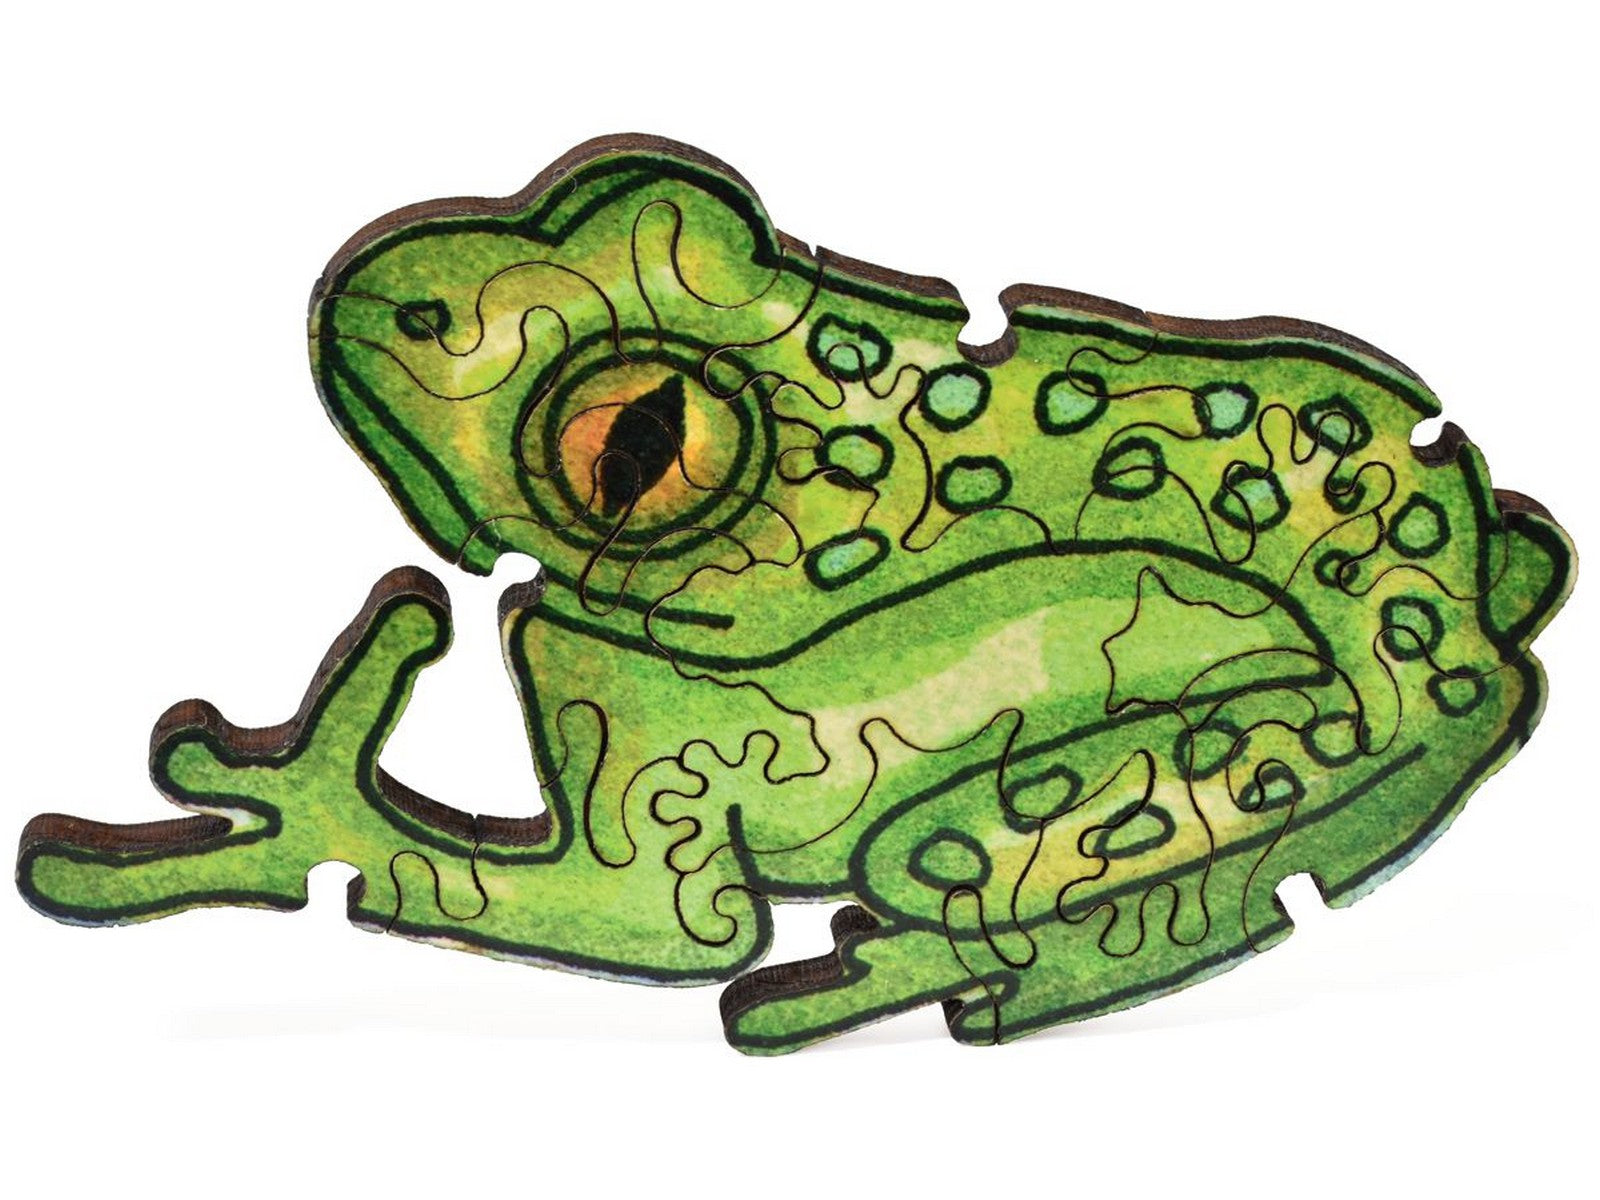 A closeup of pieces showing a multi-piece frog.